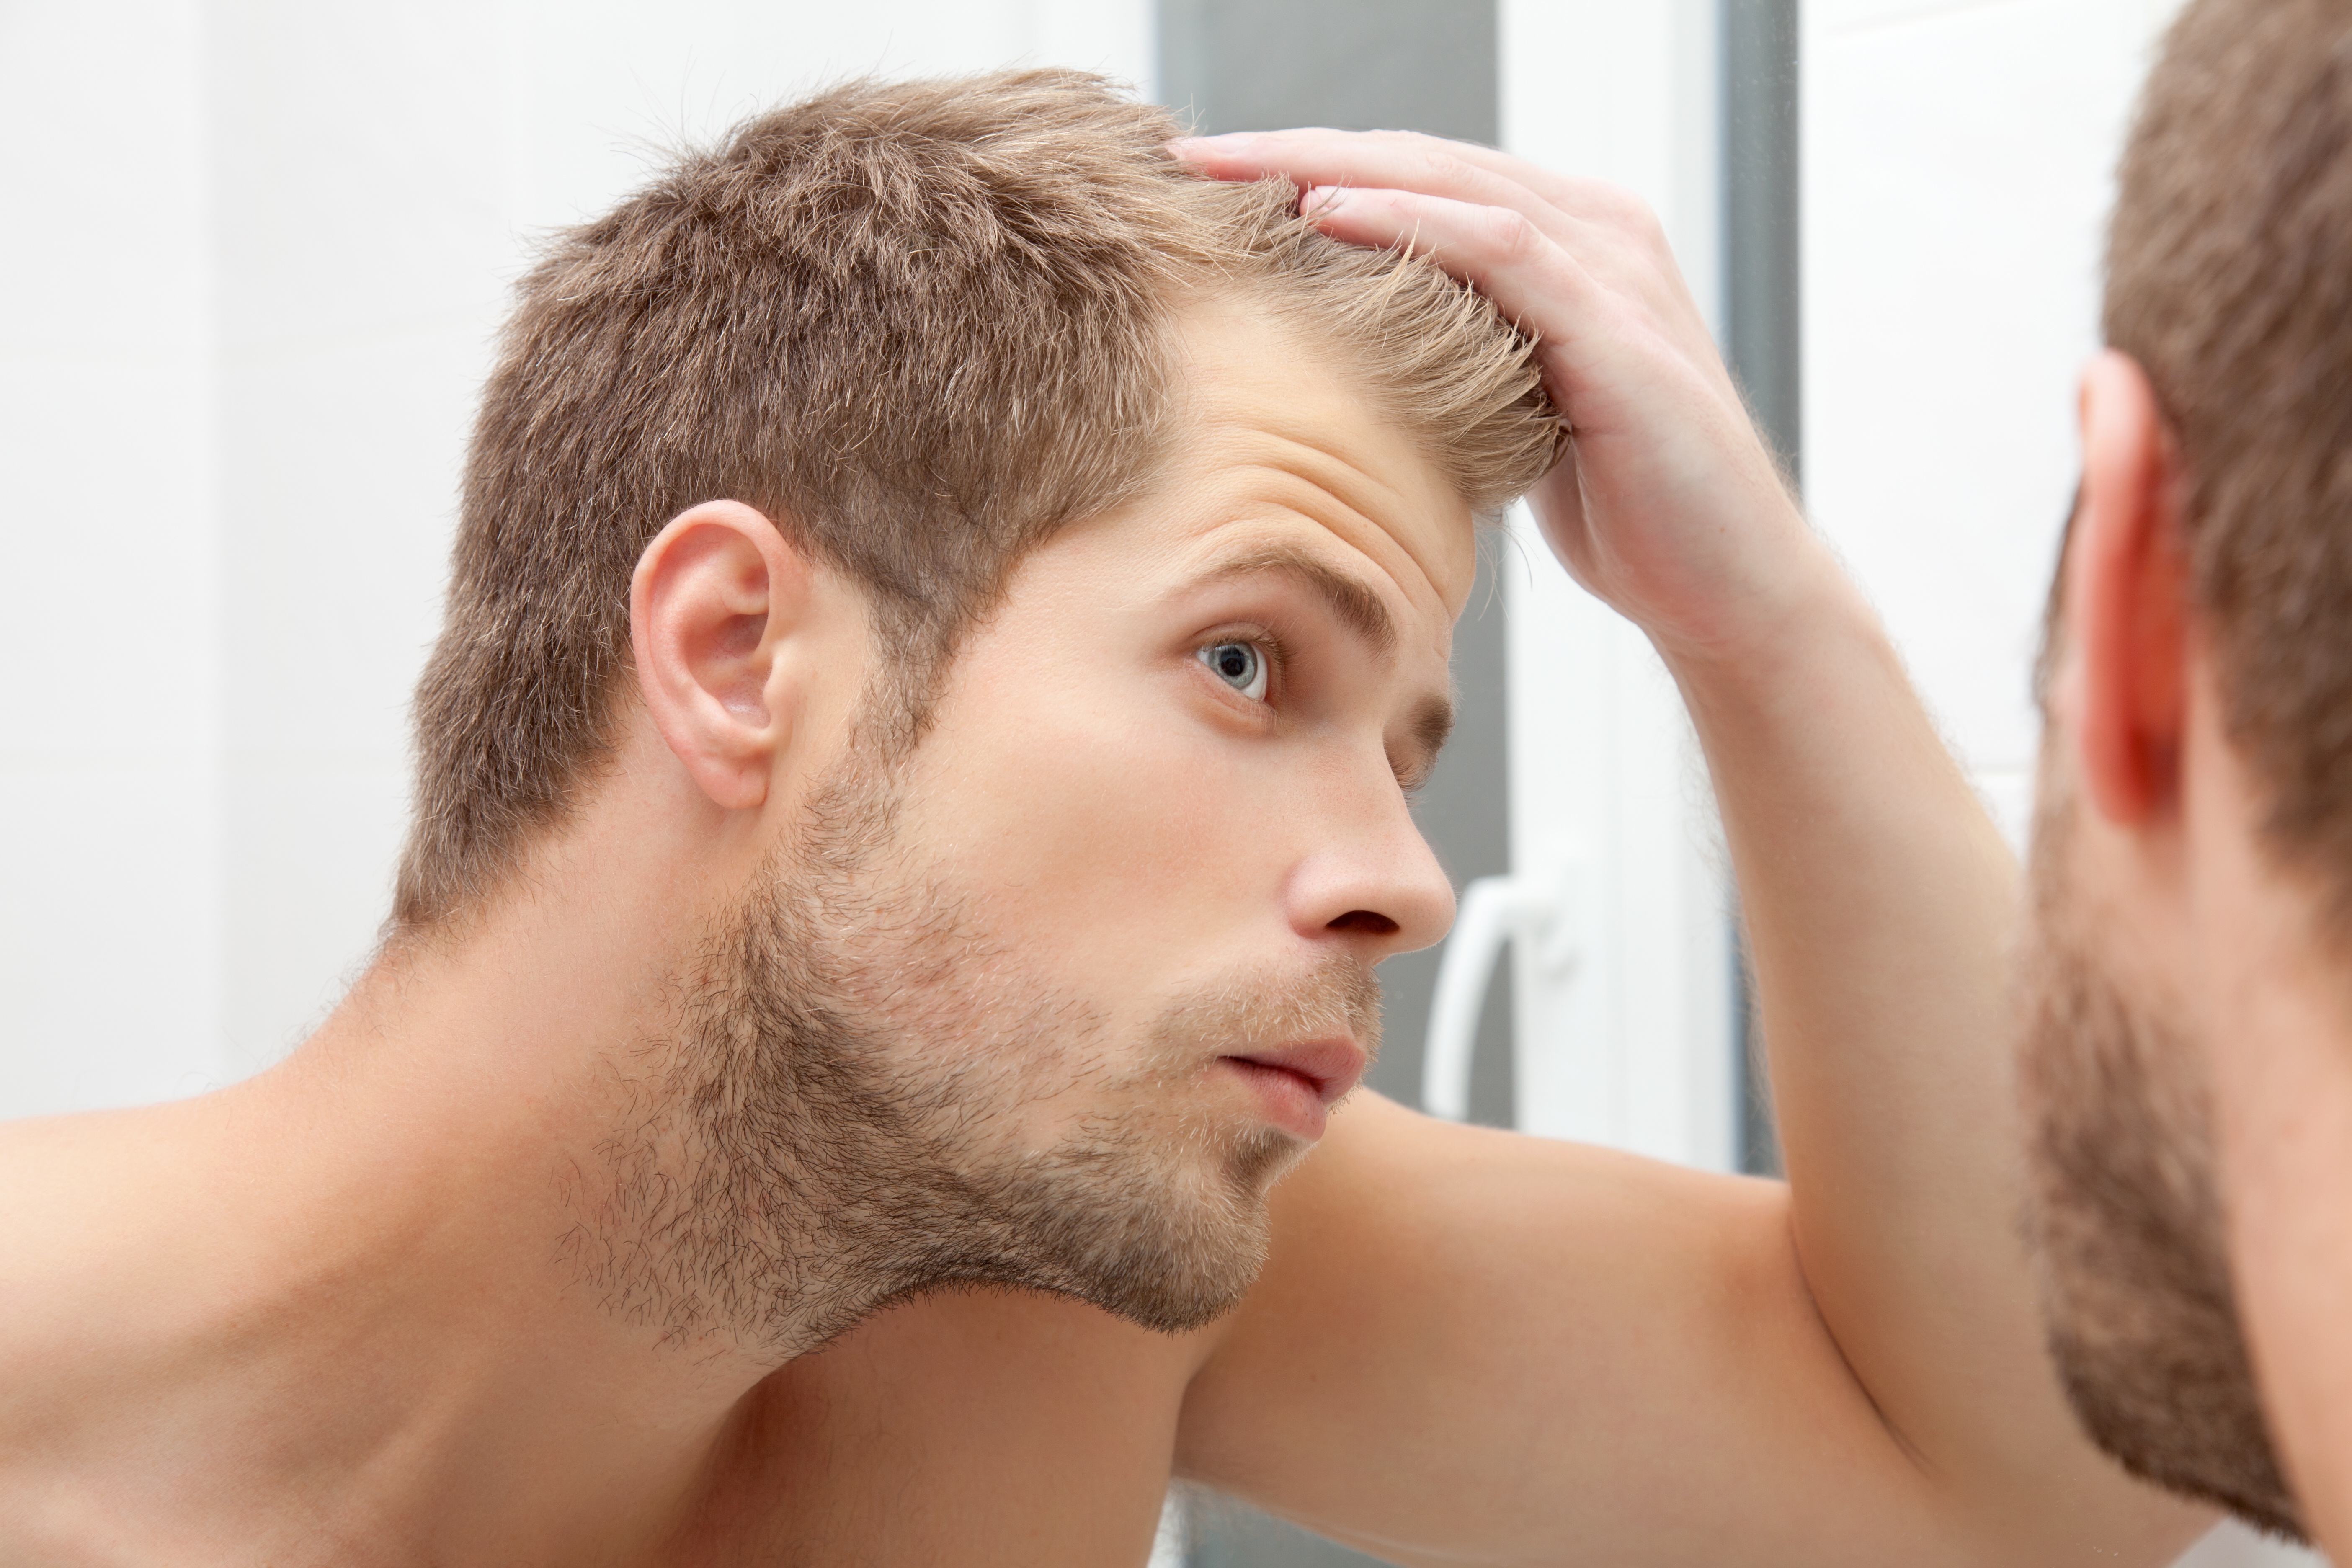 Hair loss is a common problem for many people